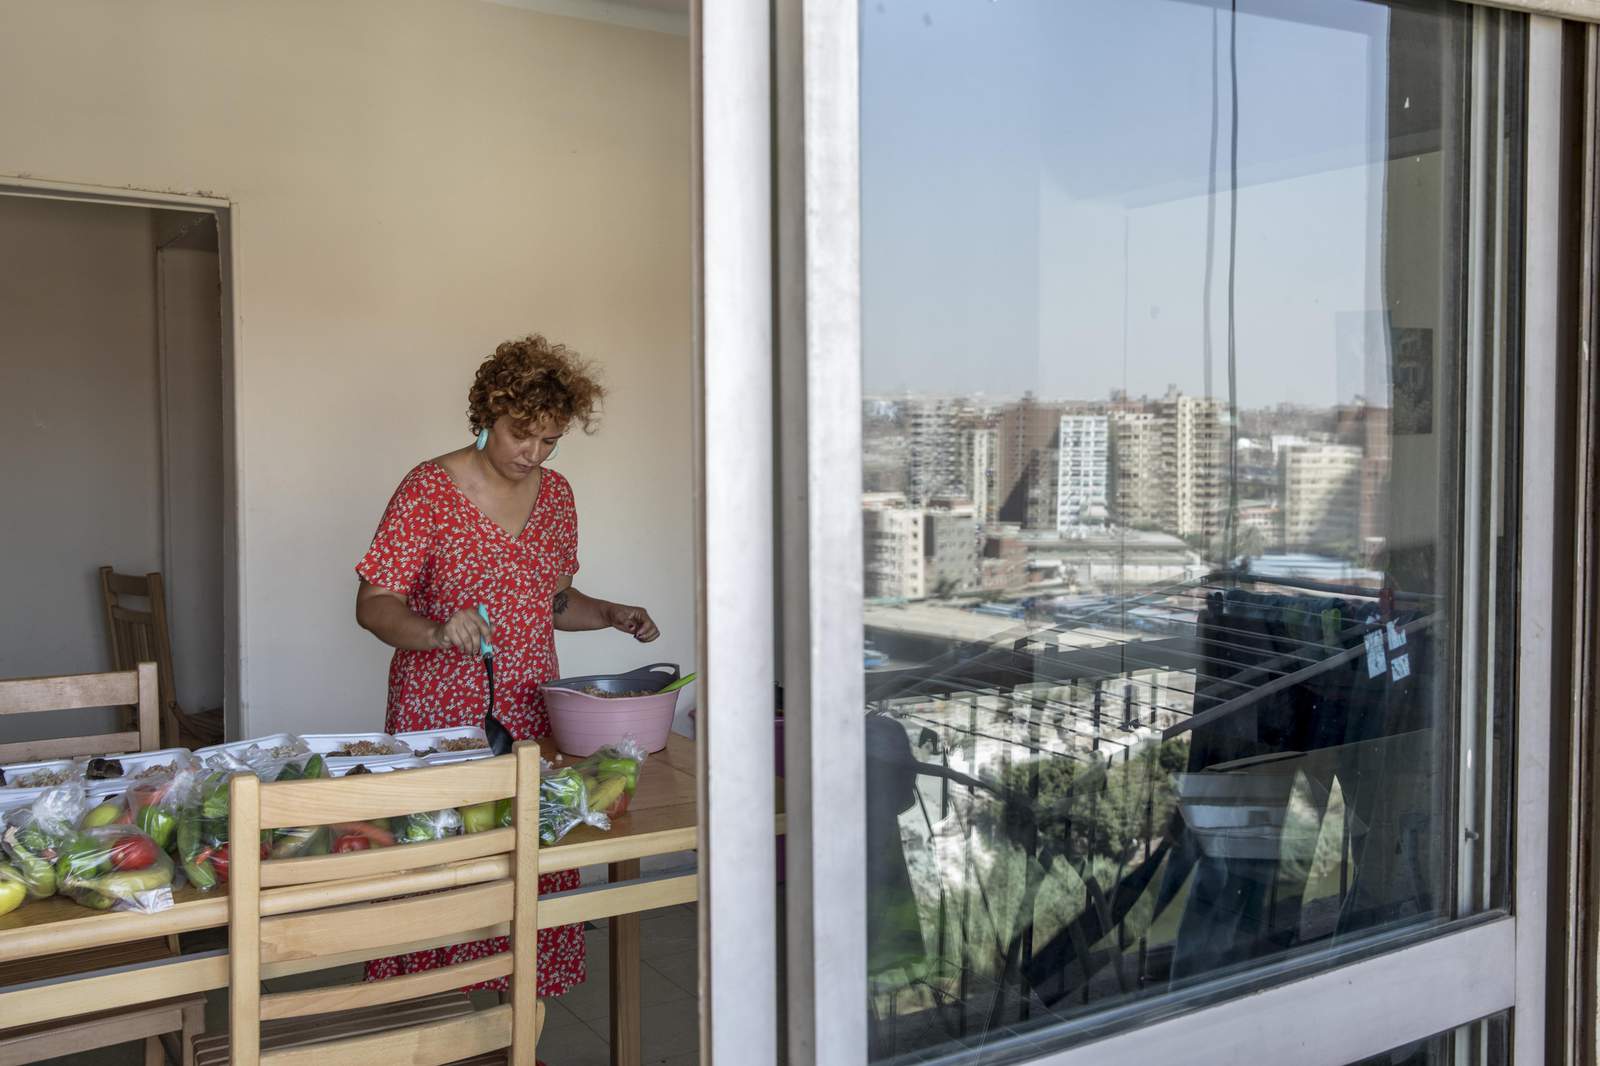 In Egypt, volunteers make meals with love for virus patients